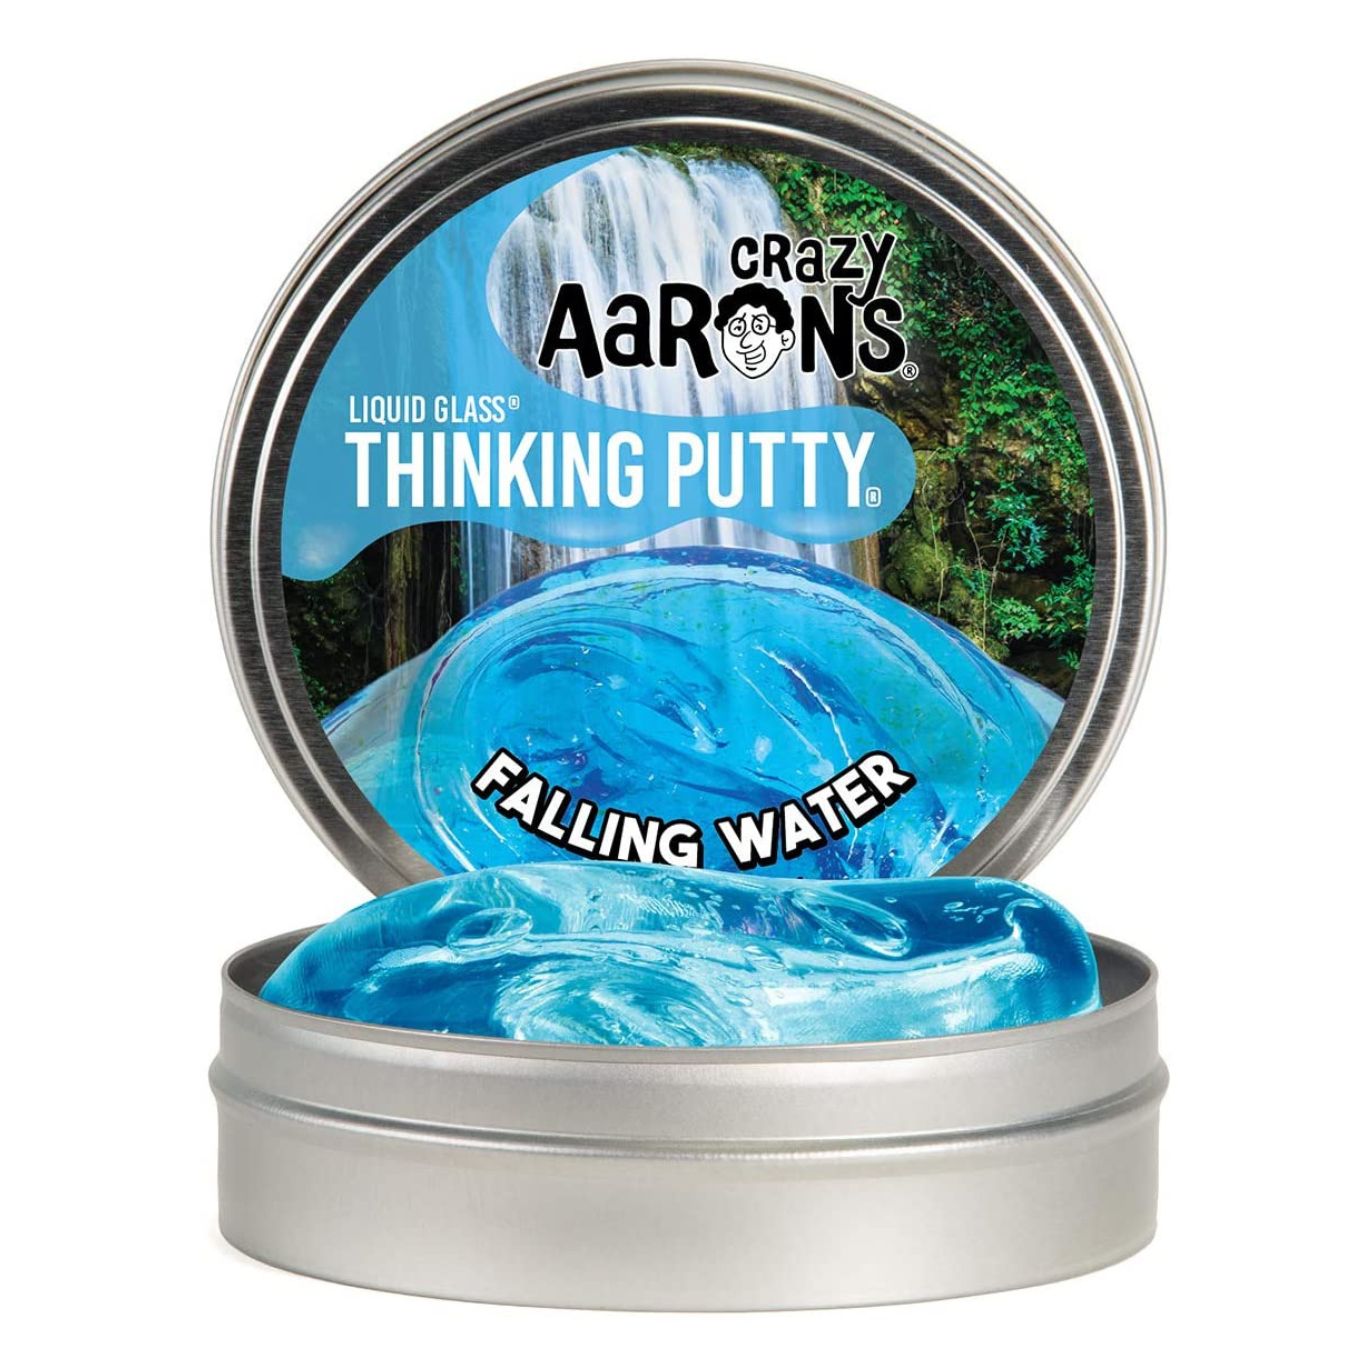 Crazy Aaron's Liquid Glass Thinking Putty - Falling Water